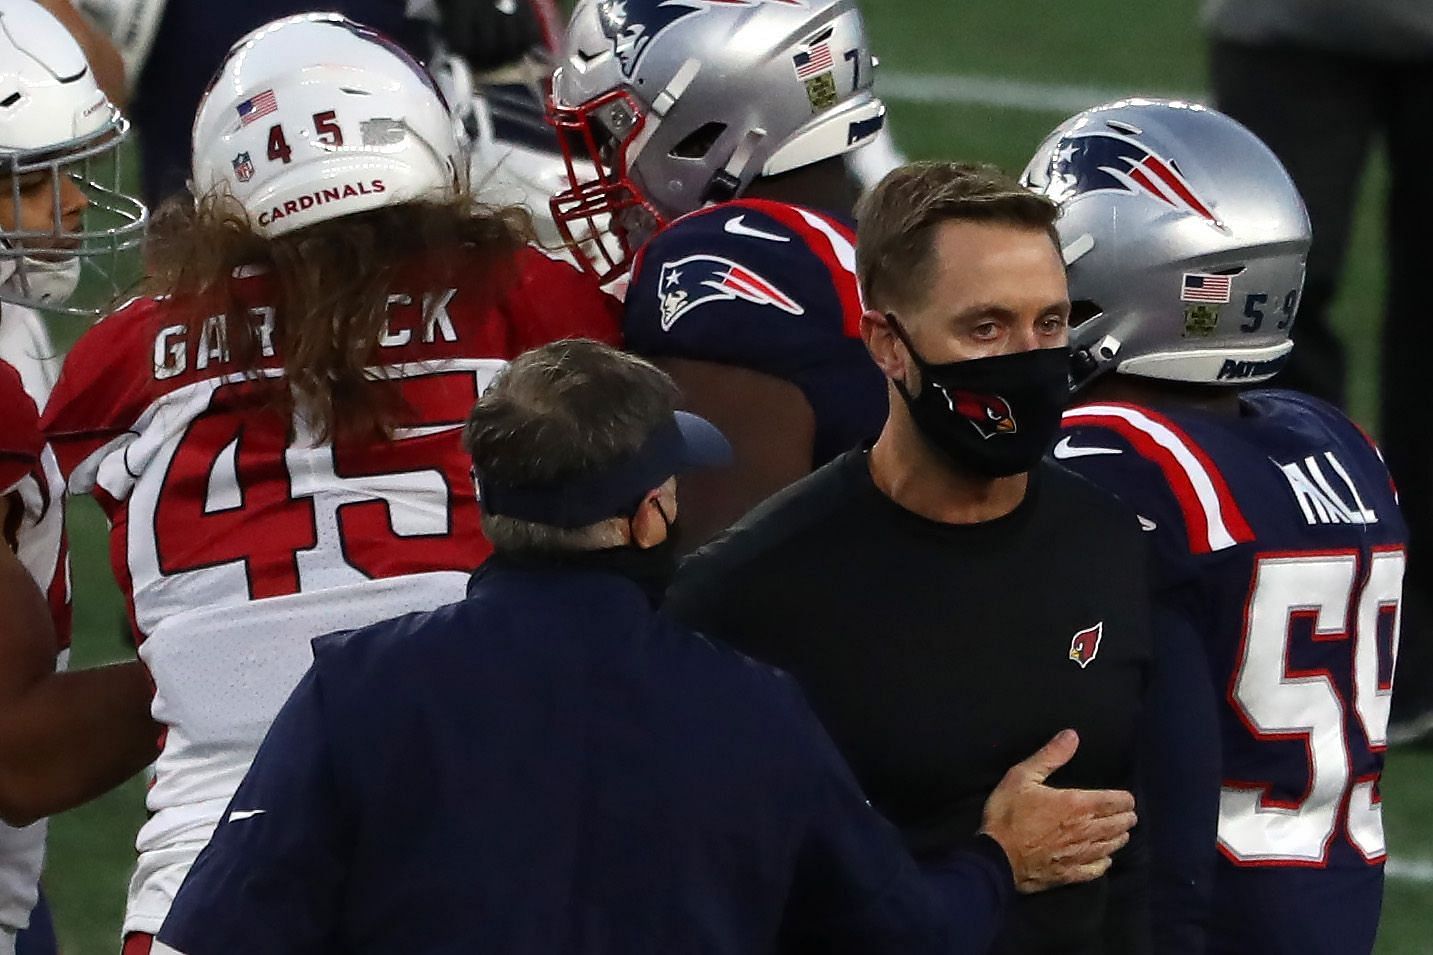 Bill Belichick stopped Kliff Kingsbury to talk after facing off in 2020